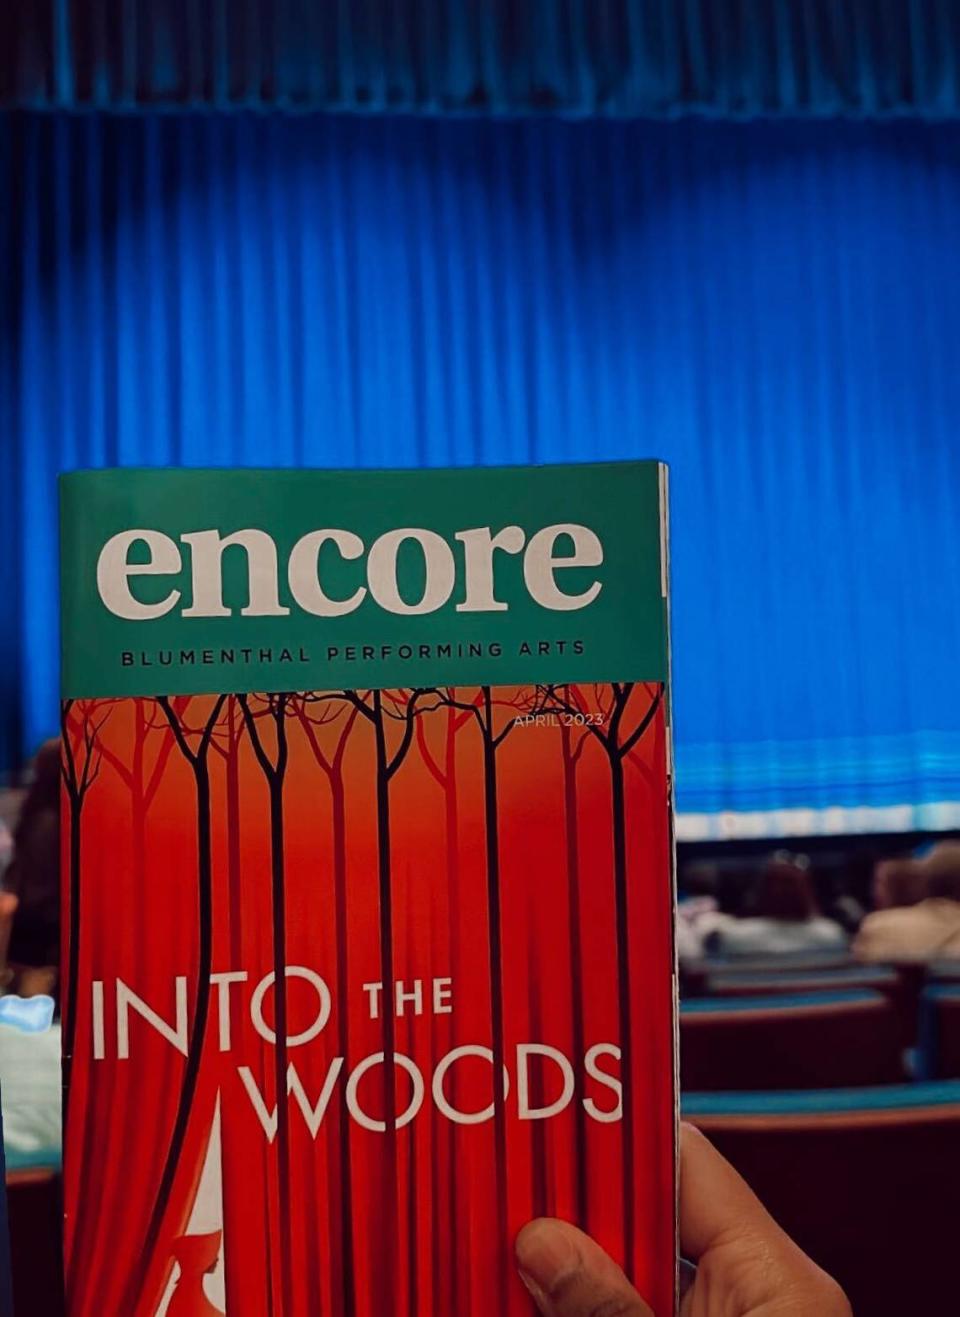 Direct from Broadway, the critically claimed production of ‘Into the Woods’ is in Charlotte this week.